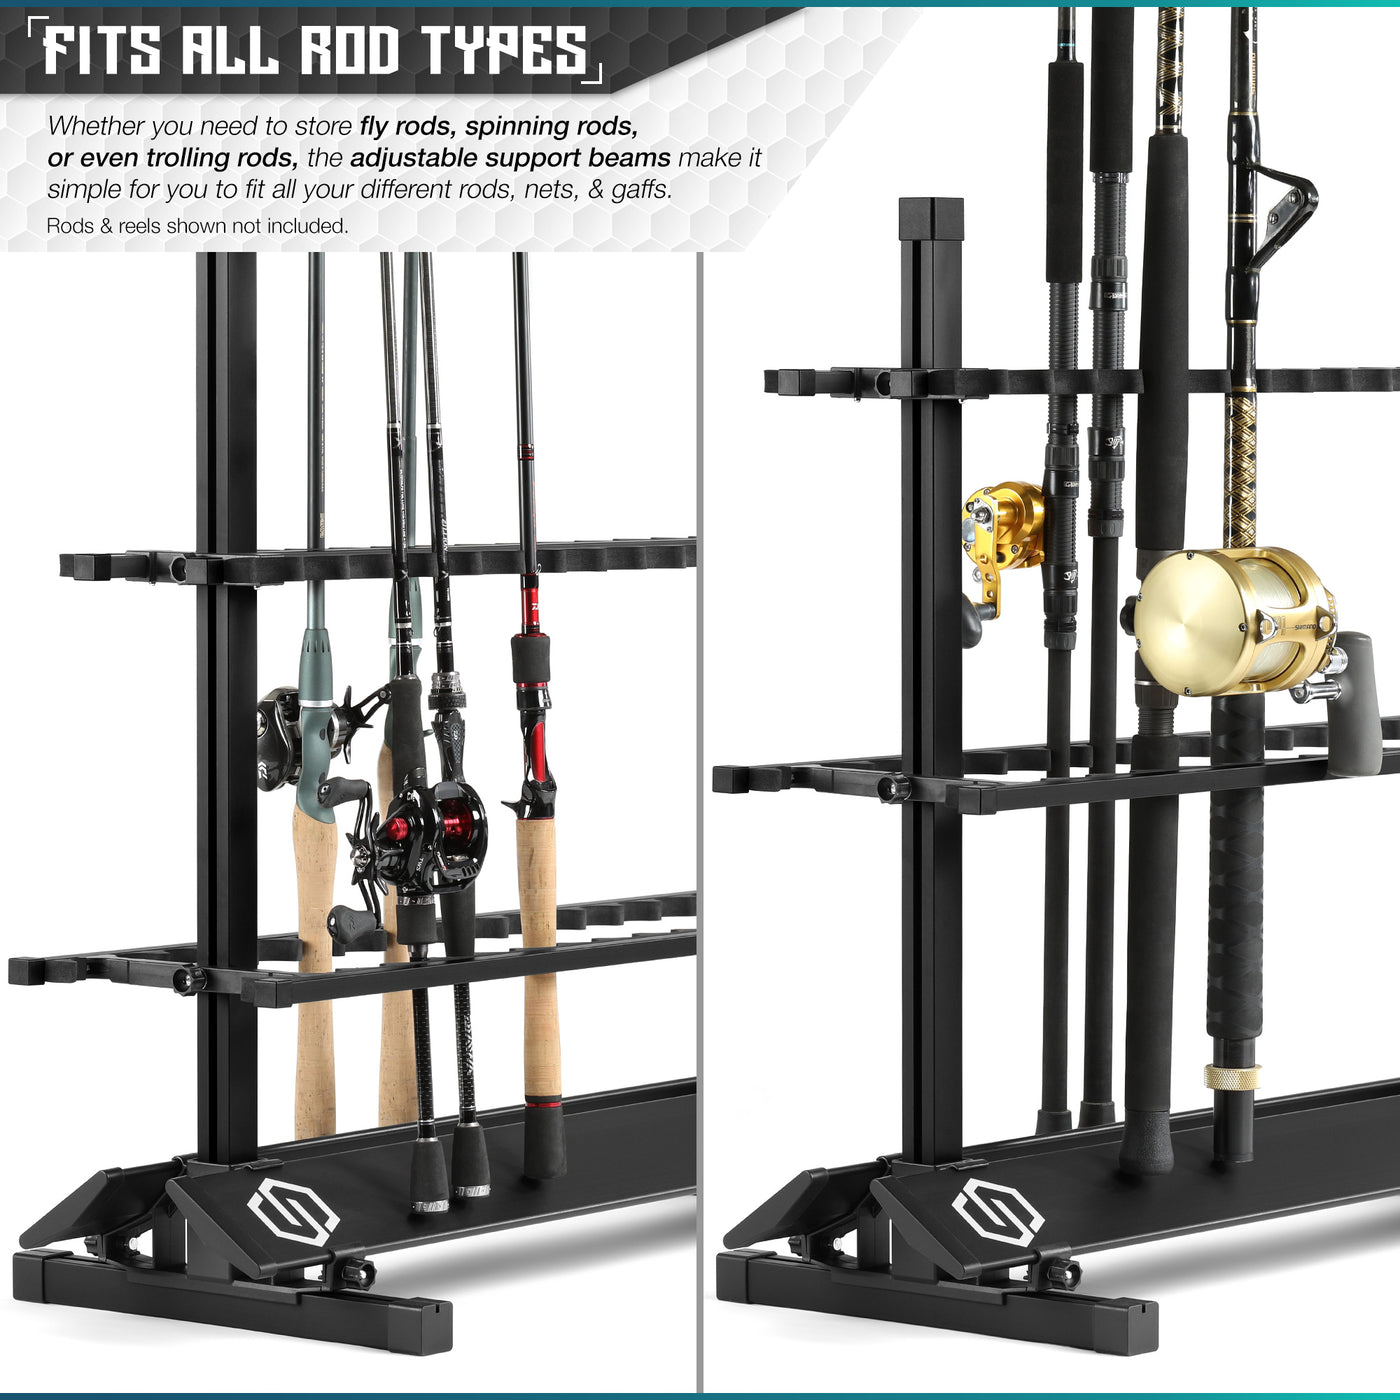 Fits All Rod Types - Whether you need to store fly rods, spinning rods, or even trolling rods, the adjustable support beams make it simple for you to fit all your different rods, nets & gaffs. Rods & reels shown not included.